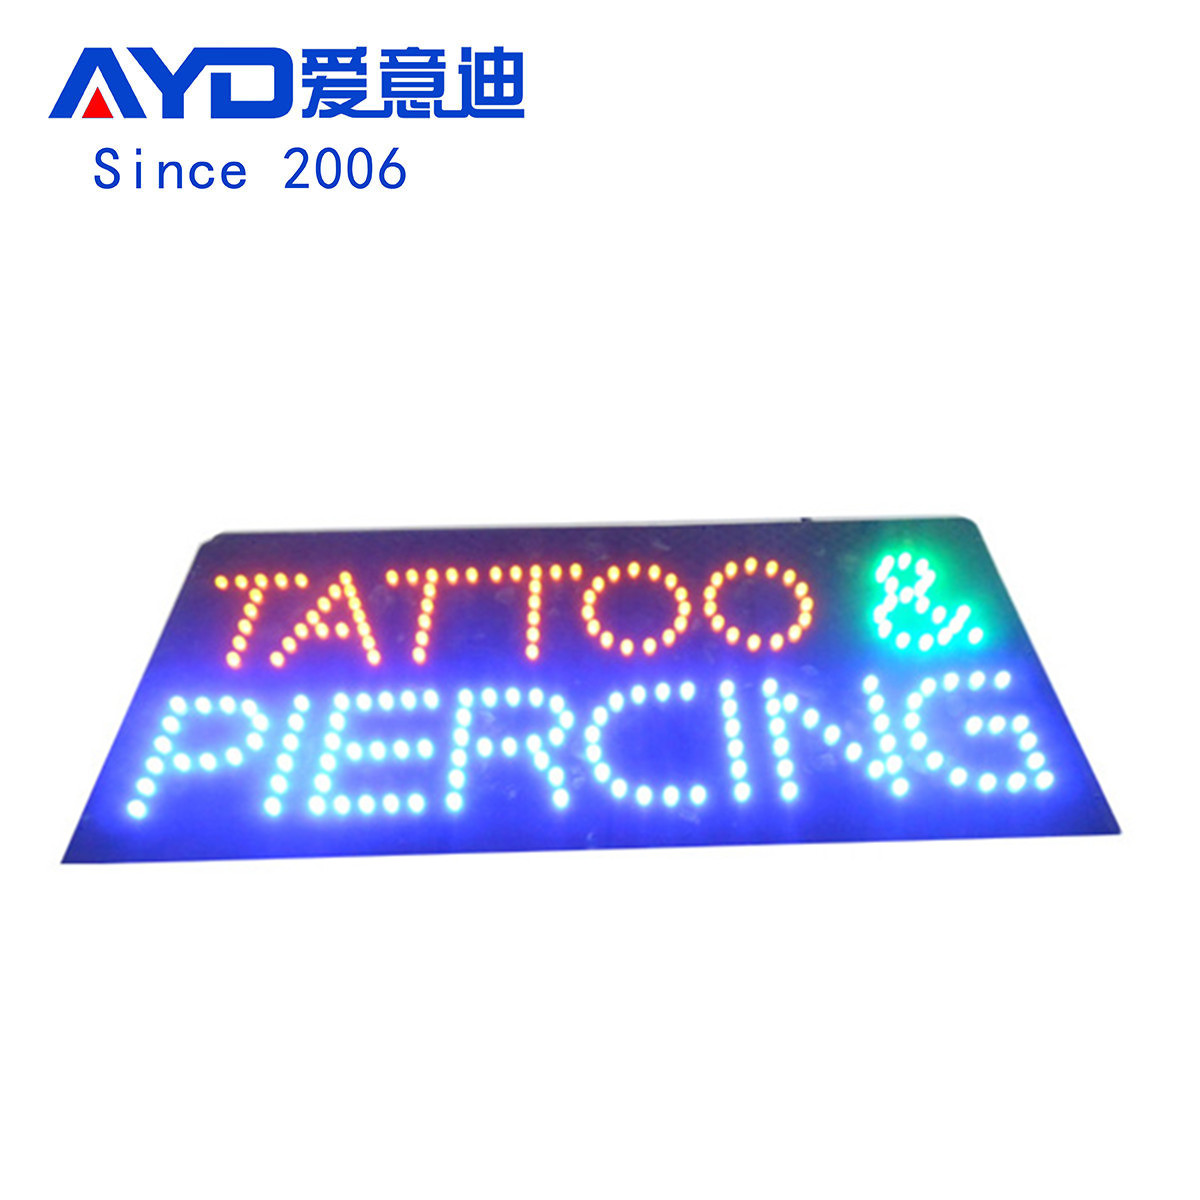 Tattoo Piercing LED Sign-HST0151